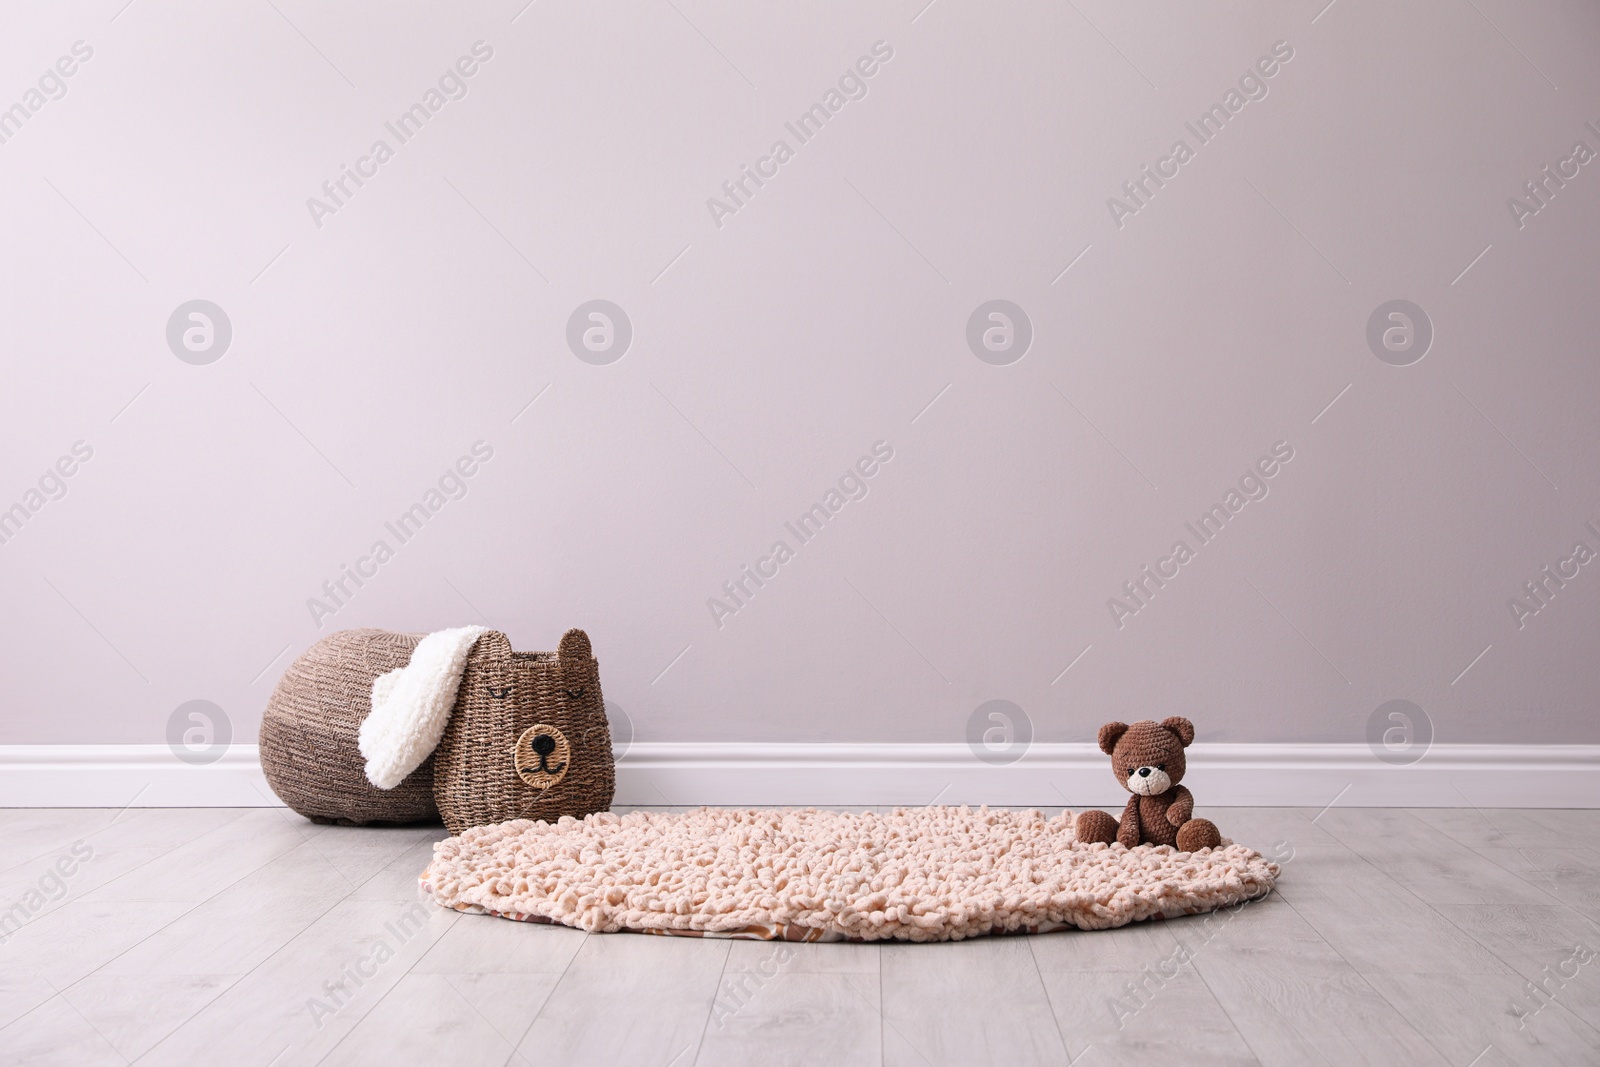 Photo of Toy bear and wicker basket near light grey wall in child room. Interior design